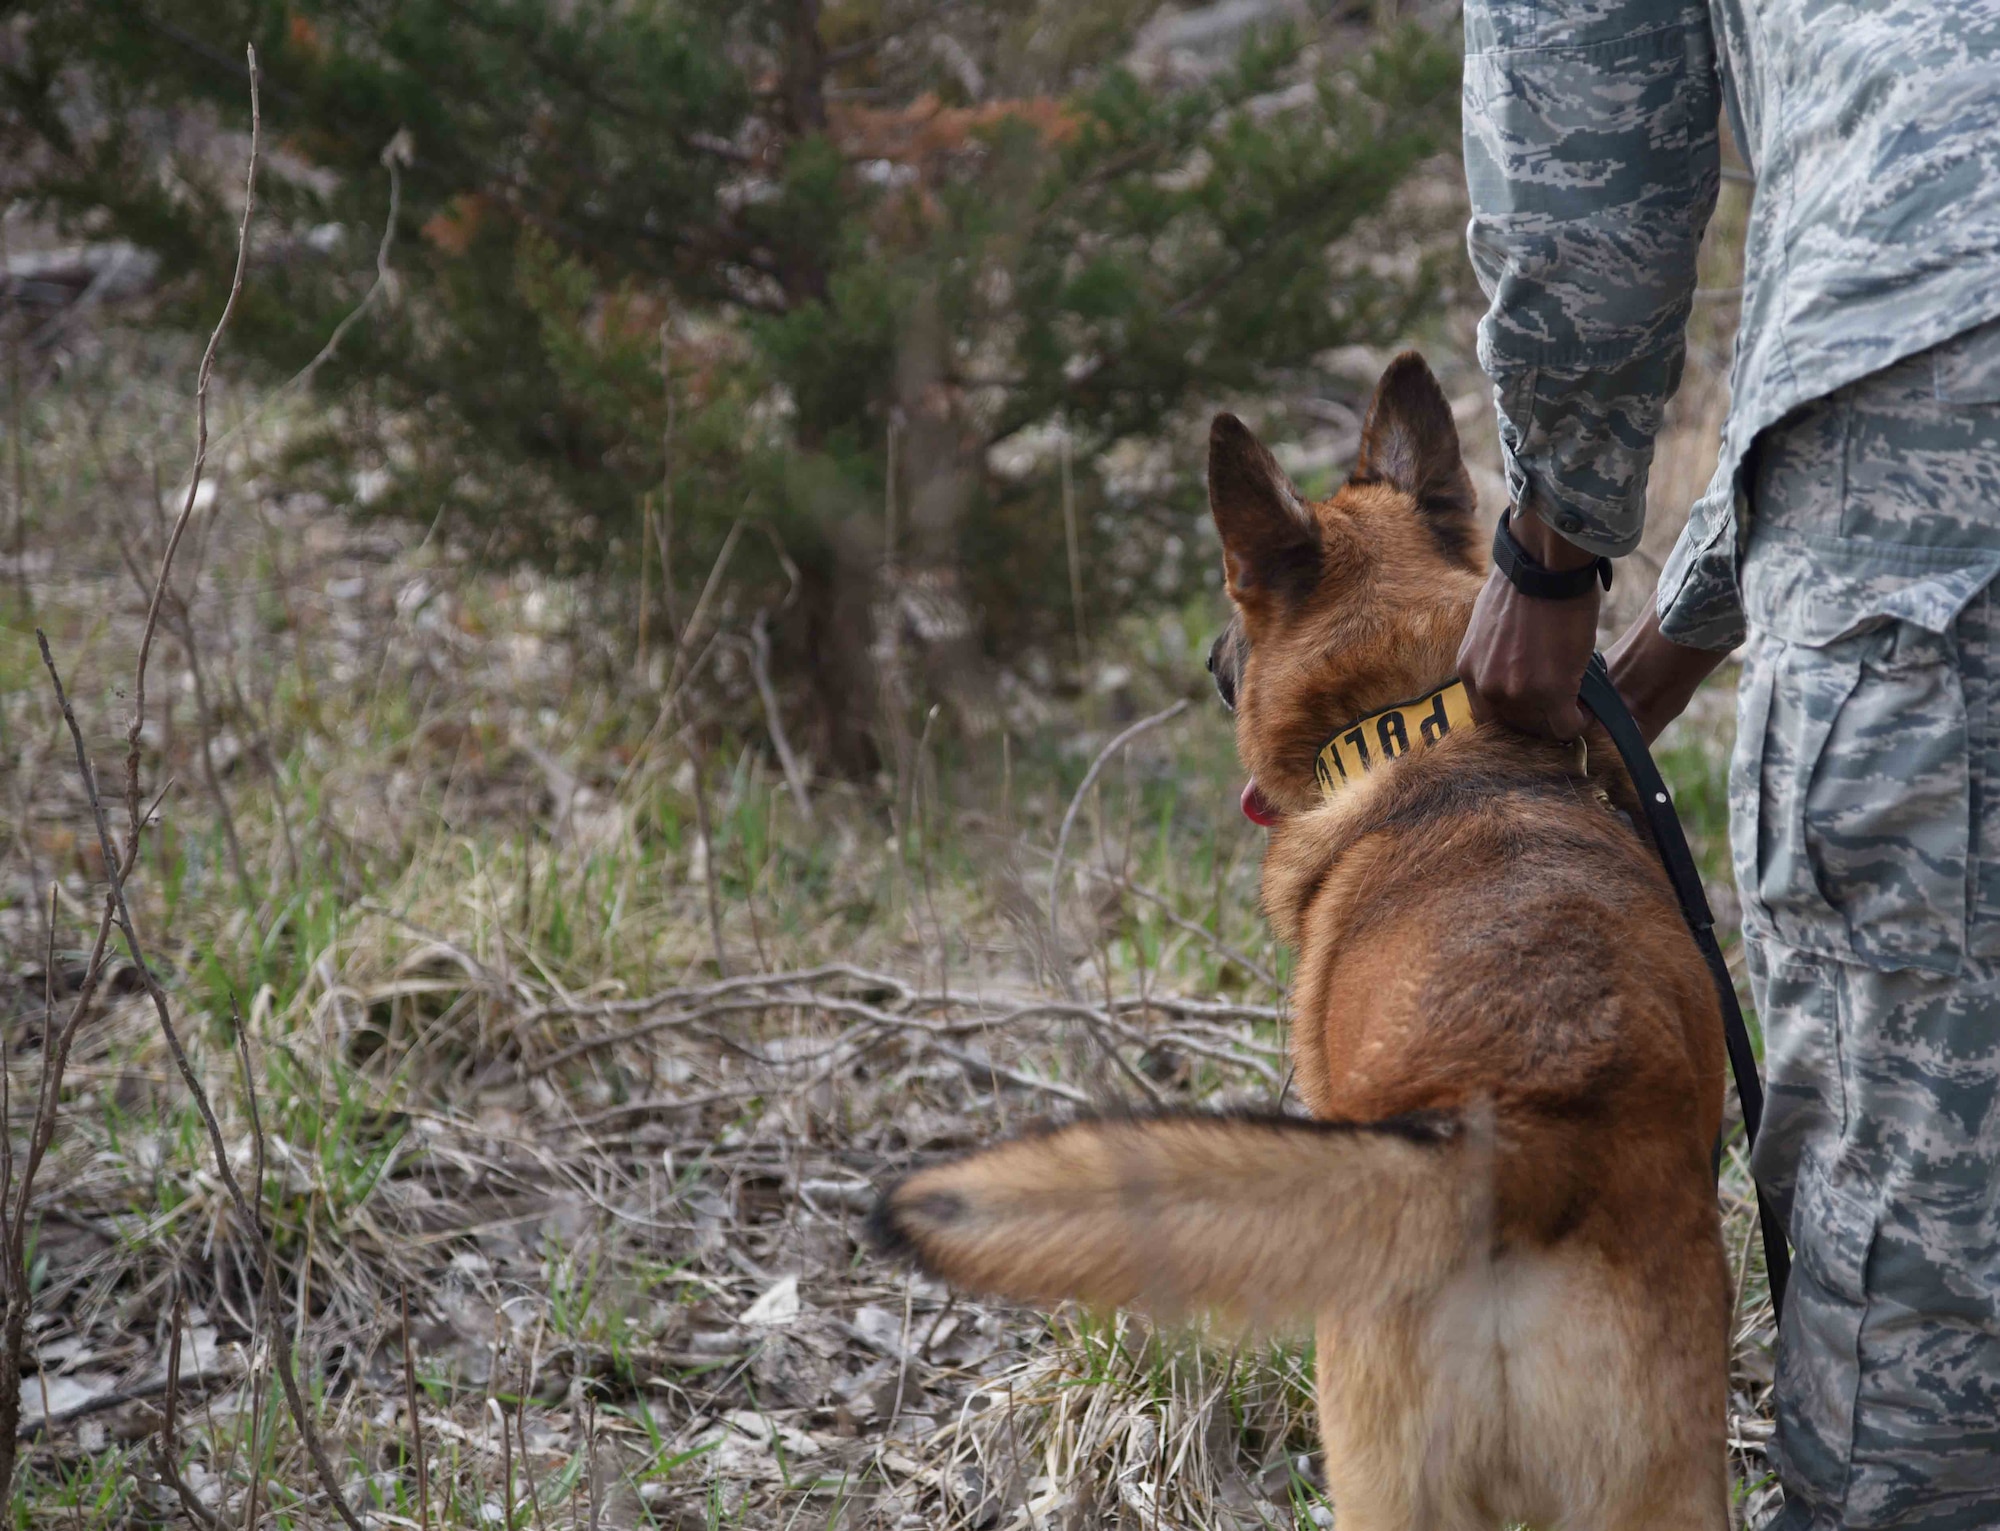 Senior Airman Brandon Proctor, 22nd Security Forces Squadron military working dog handler, prepares to release his MWD, Iras, during scout training March 23, 2017, at McConnell Air Force Base, Kan. Finding suspects in wooded areas is something the dogs practice regularly. (U.S. Air Force photo/Airman 1st Class Erin McClellan)